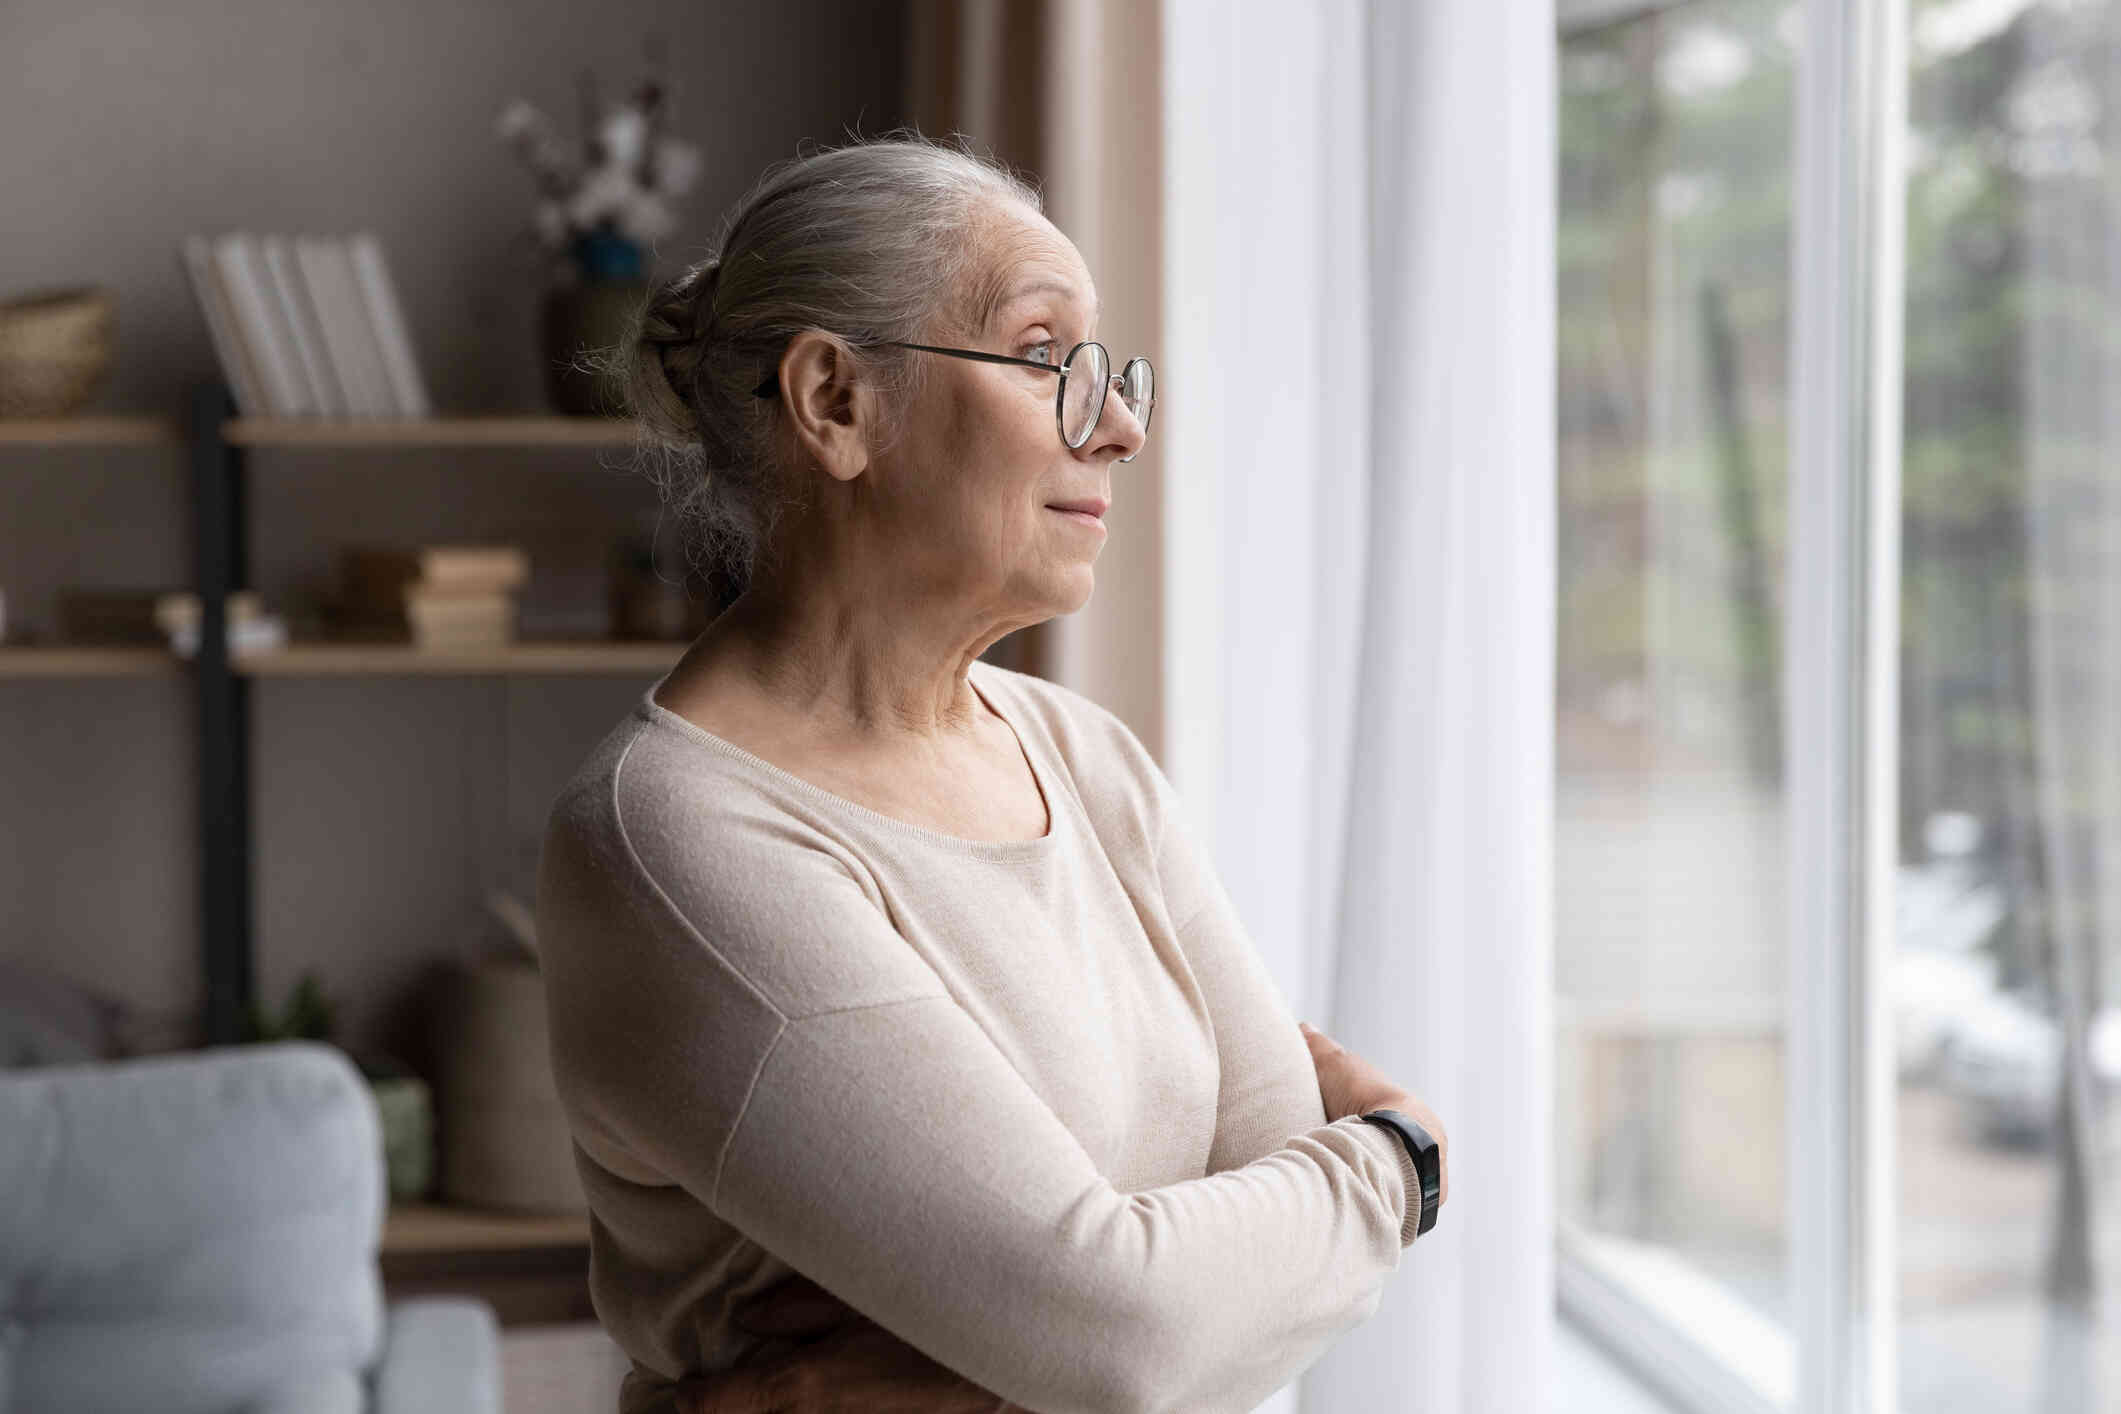 An elderly woman with glasses crosses her arms and looks out of a window.